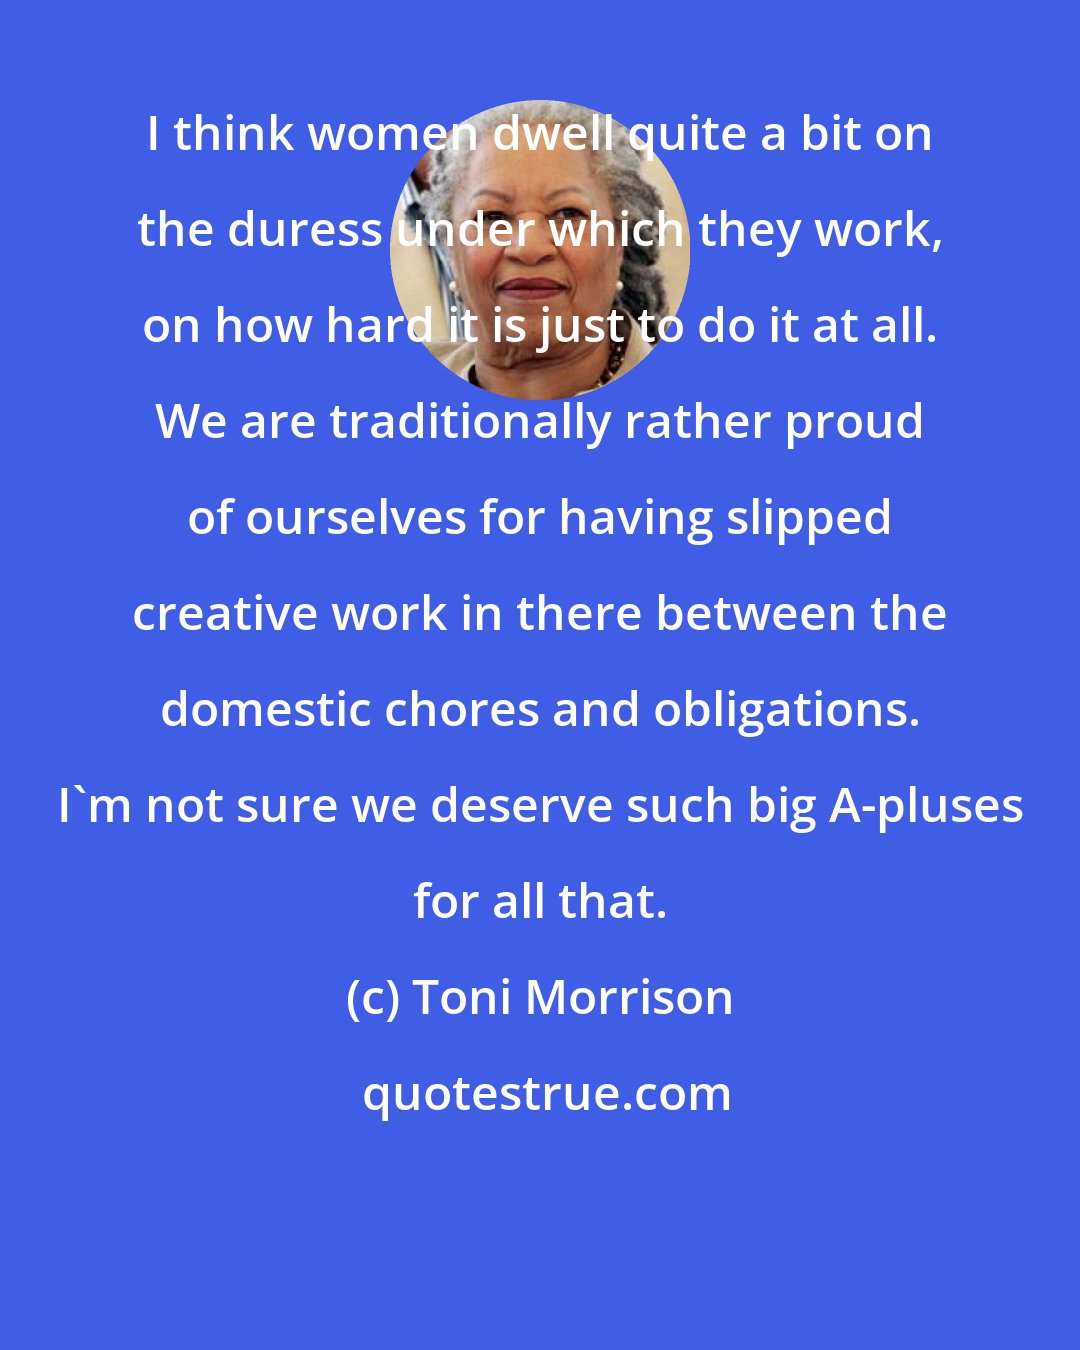 Toni Morrison: I think women dwell quite a bit on the duress under which they work, on how hard it is just to do it at all. We are traditionally rather proud of ourselves for having slipped creative work in there between the domestic chores and obligations. I'm not sure we deserve such big A-pluses for all that.